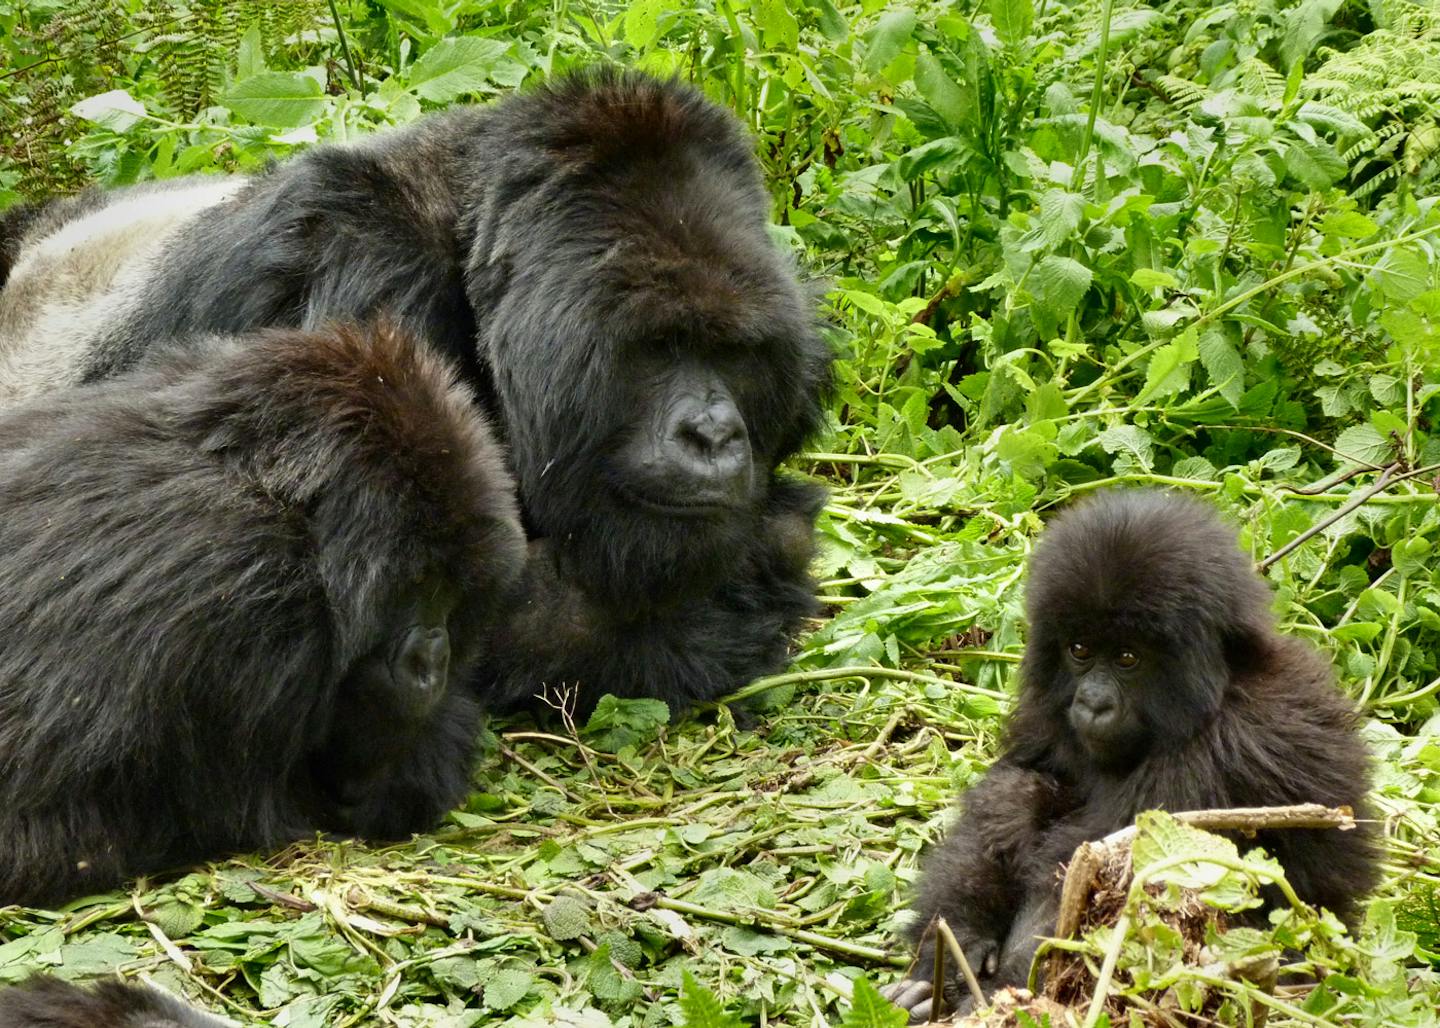 Wild gorillas sing happy songs while they eat